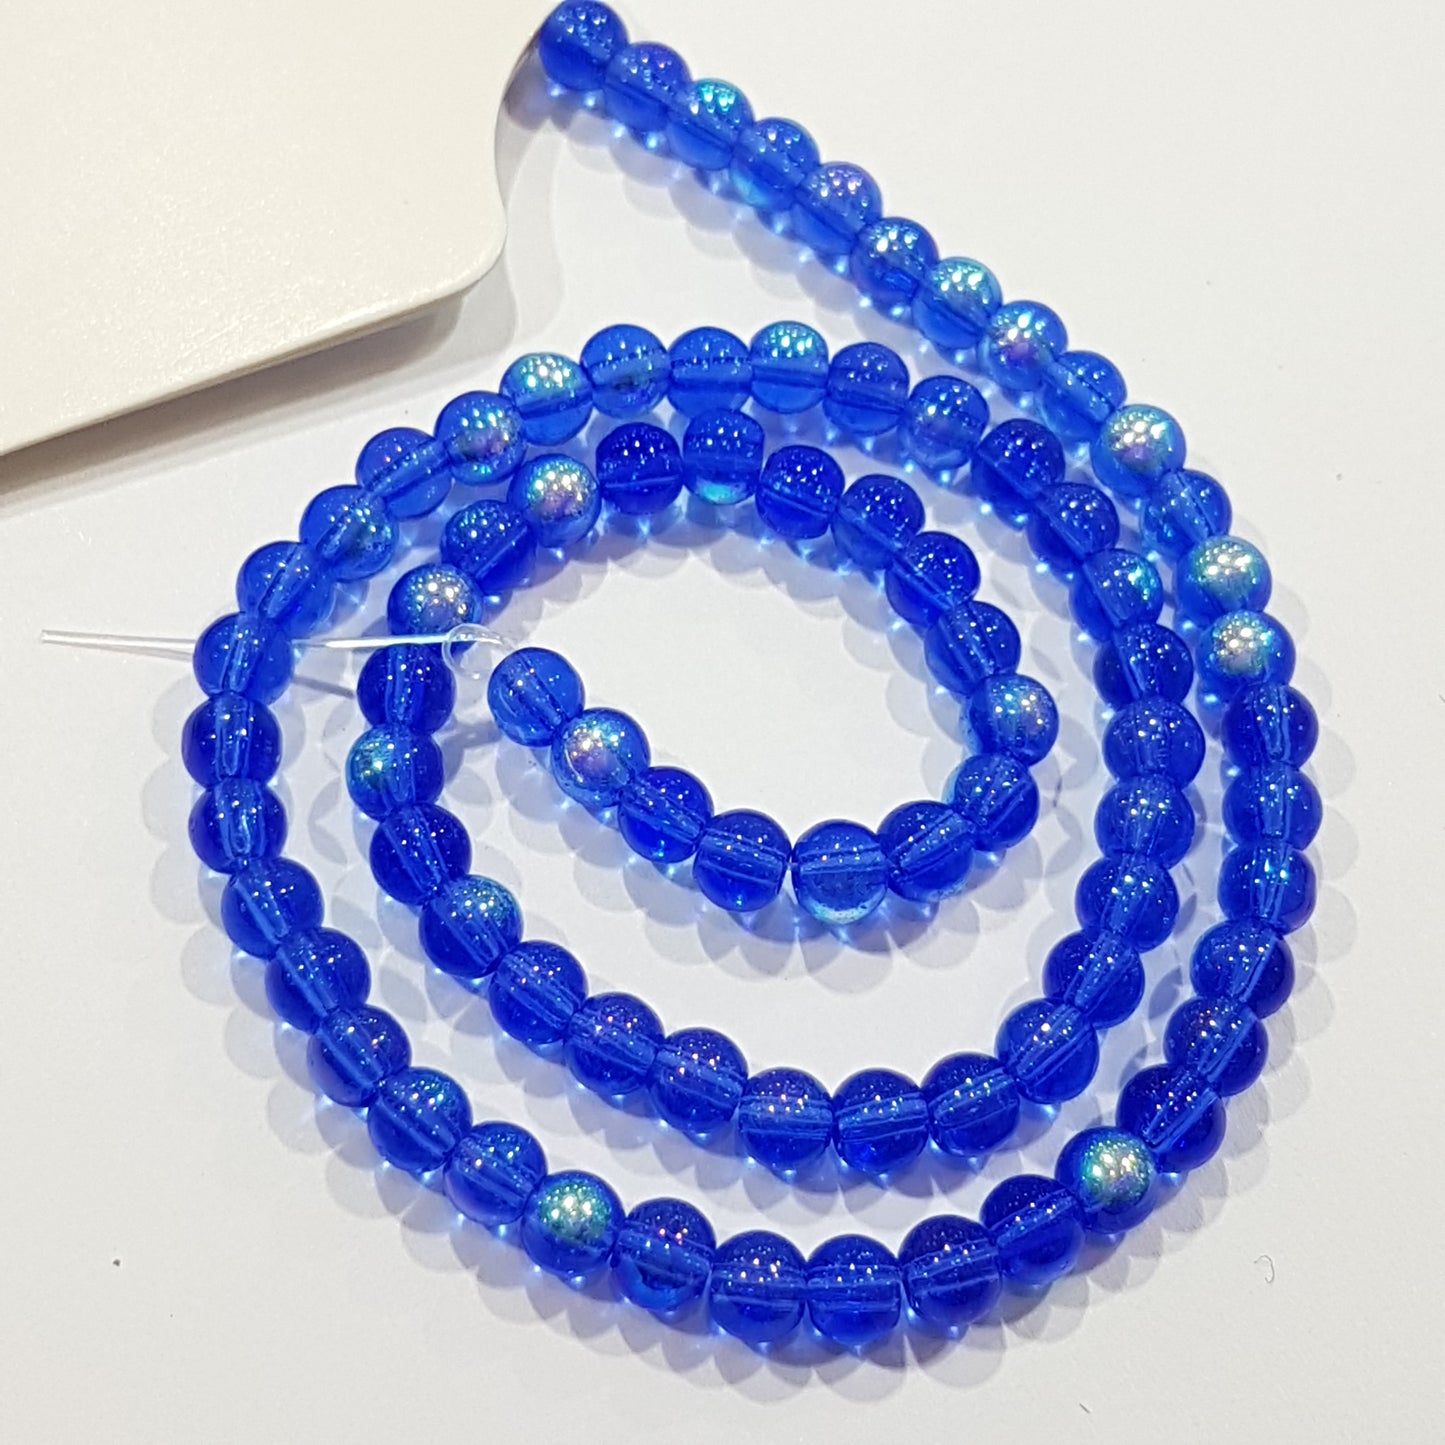 80pc 4mm Blue AB Glass Beads